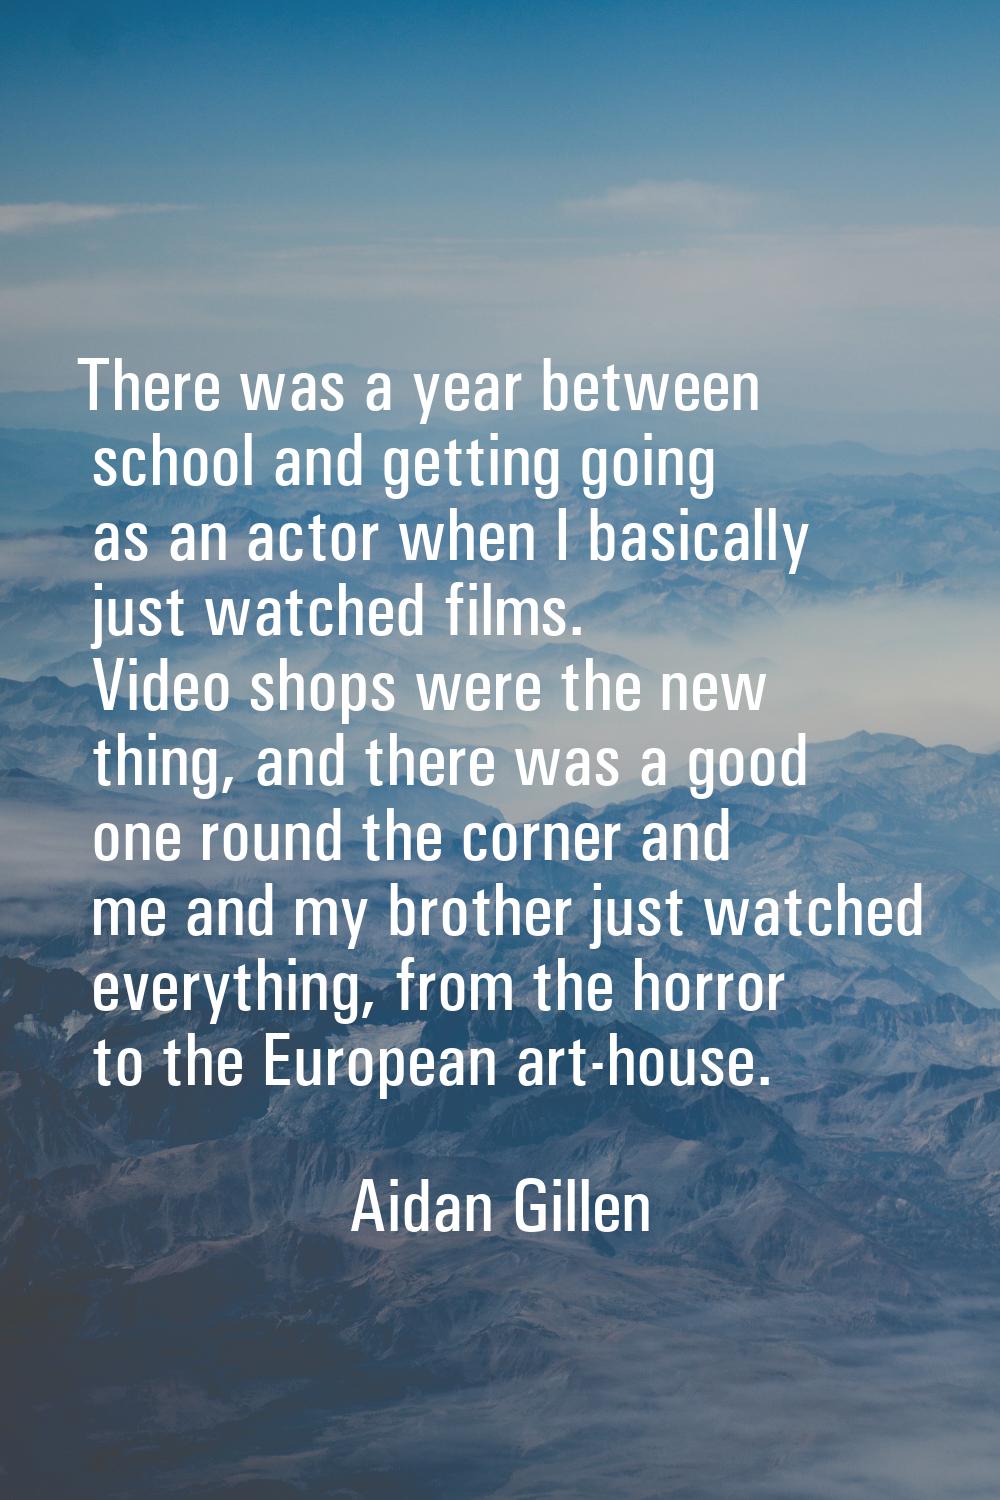 There was a year between school and getting going as an actor when I basically just watched films. 